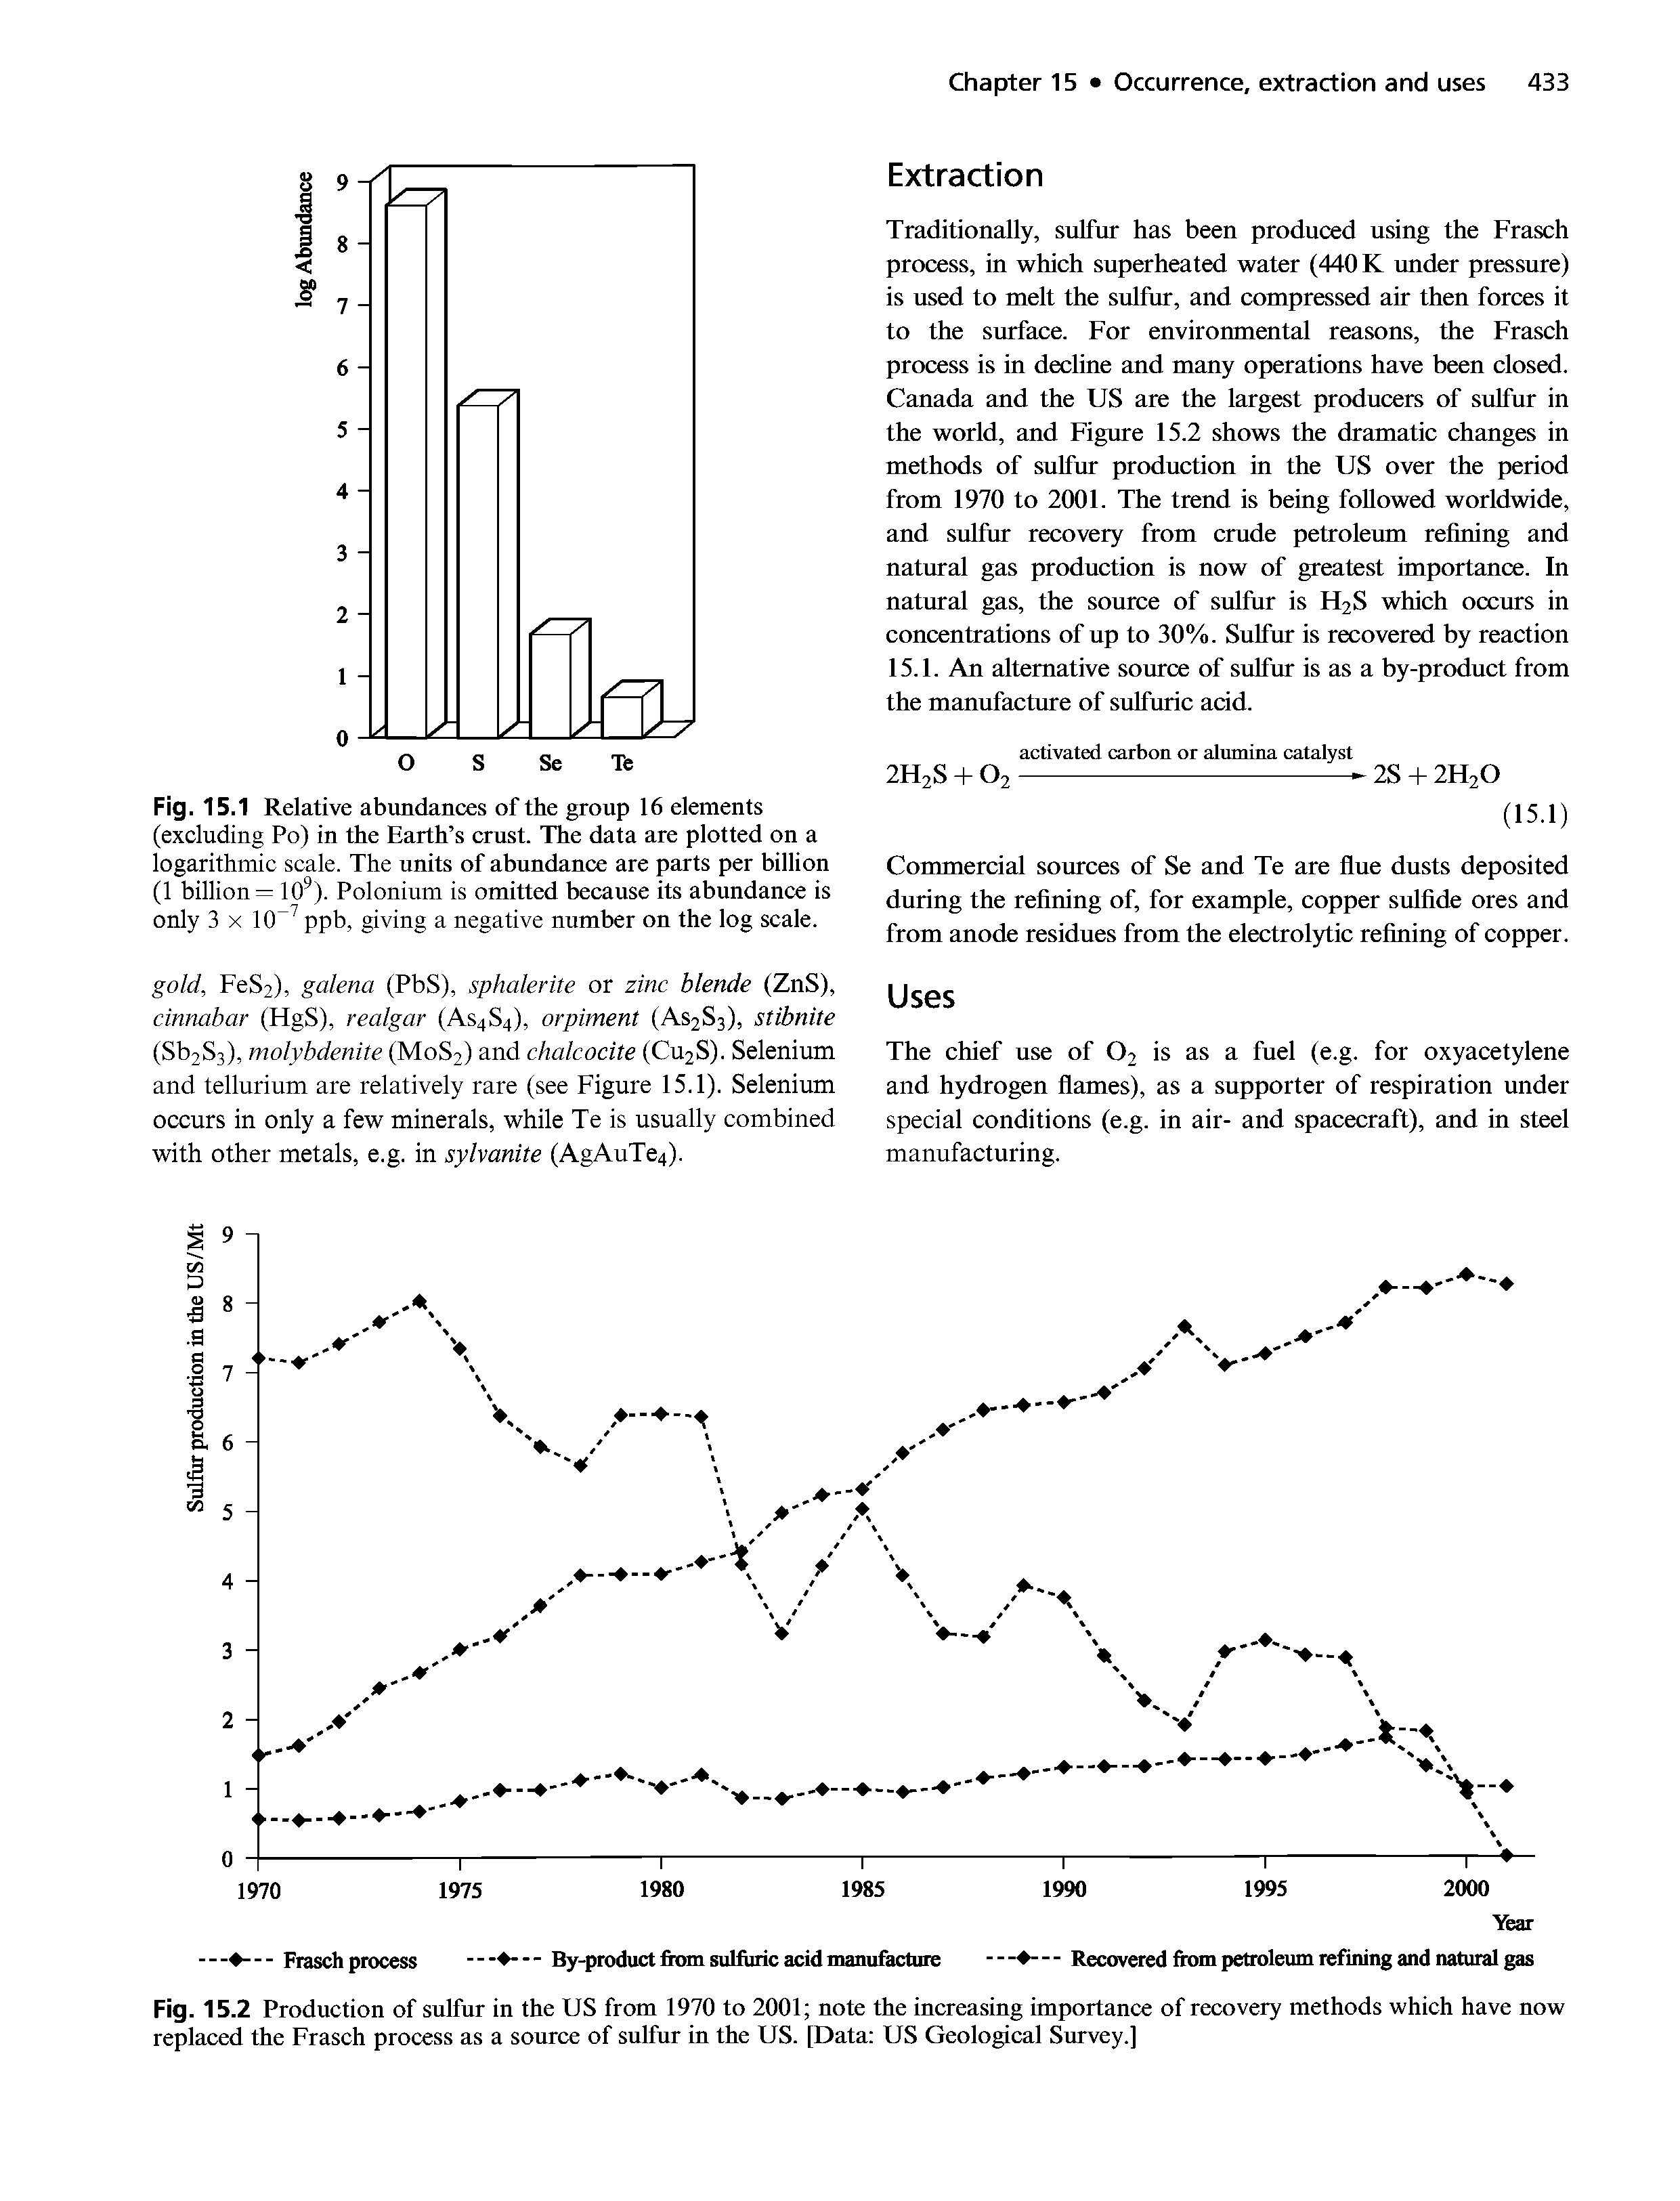 Fig. 15.2 Production of sulfur in the US from 1970 to 2001 note the increasing importance of recovery methods which have now replaced the Frasch process as a source of sulfur in the US. [Data US Geological Survey.]...